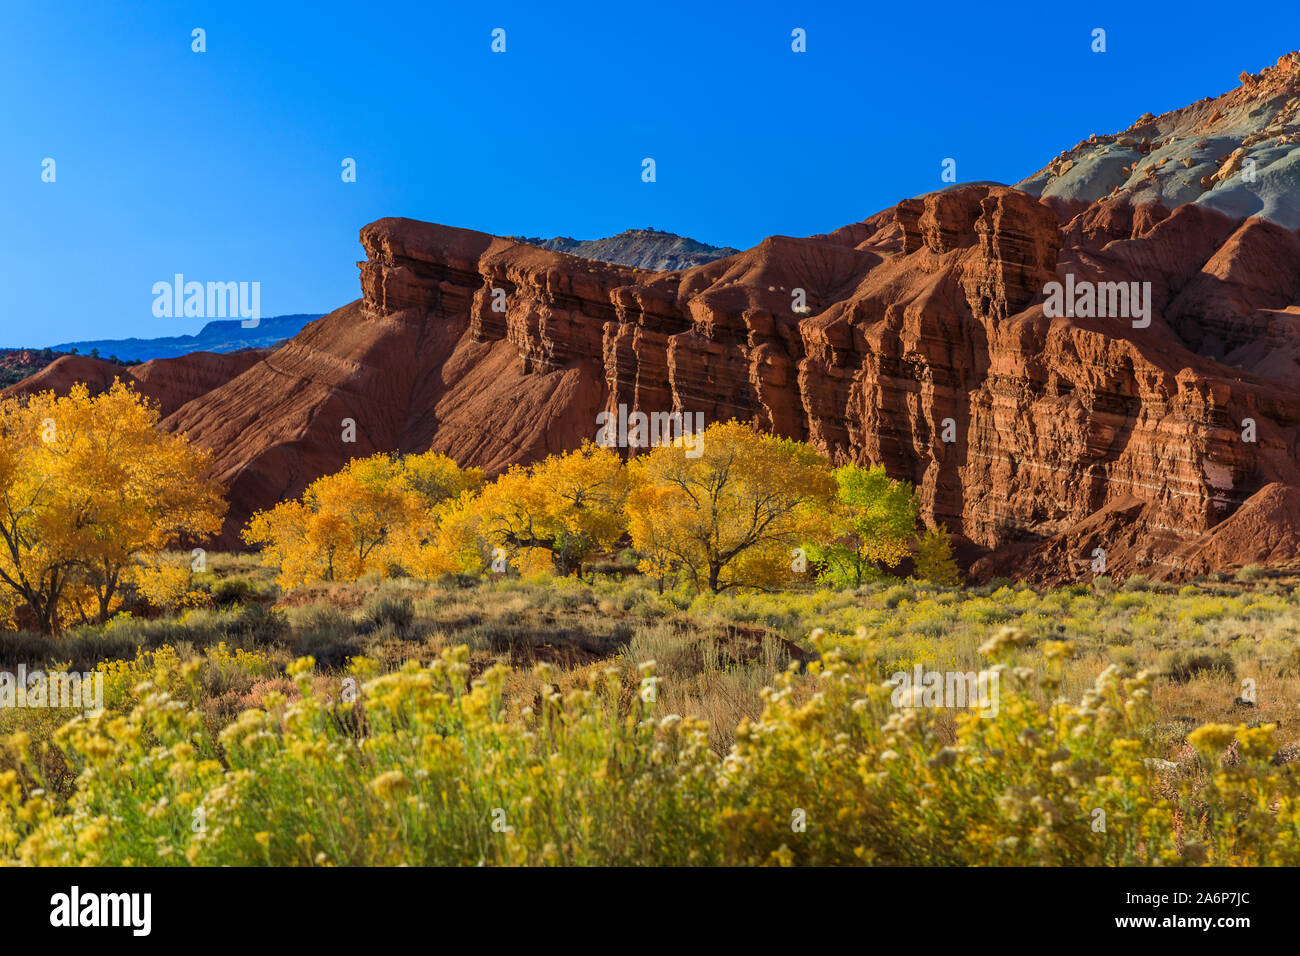 The golden leaves on the cottonwood trees at the base of the red sandstone cliffs in the Fruita area of Capitol Reef National Park, Utah, USA. Stock Photo